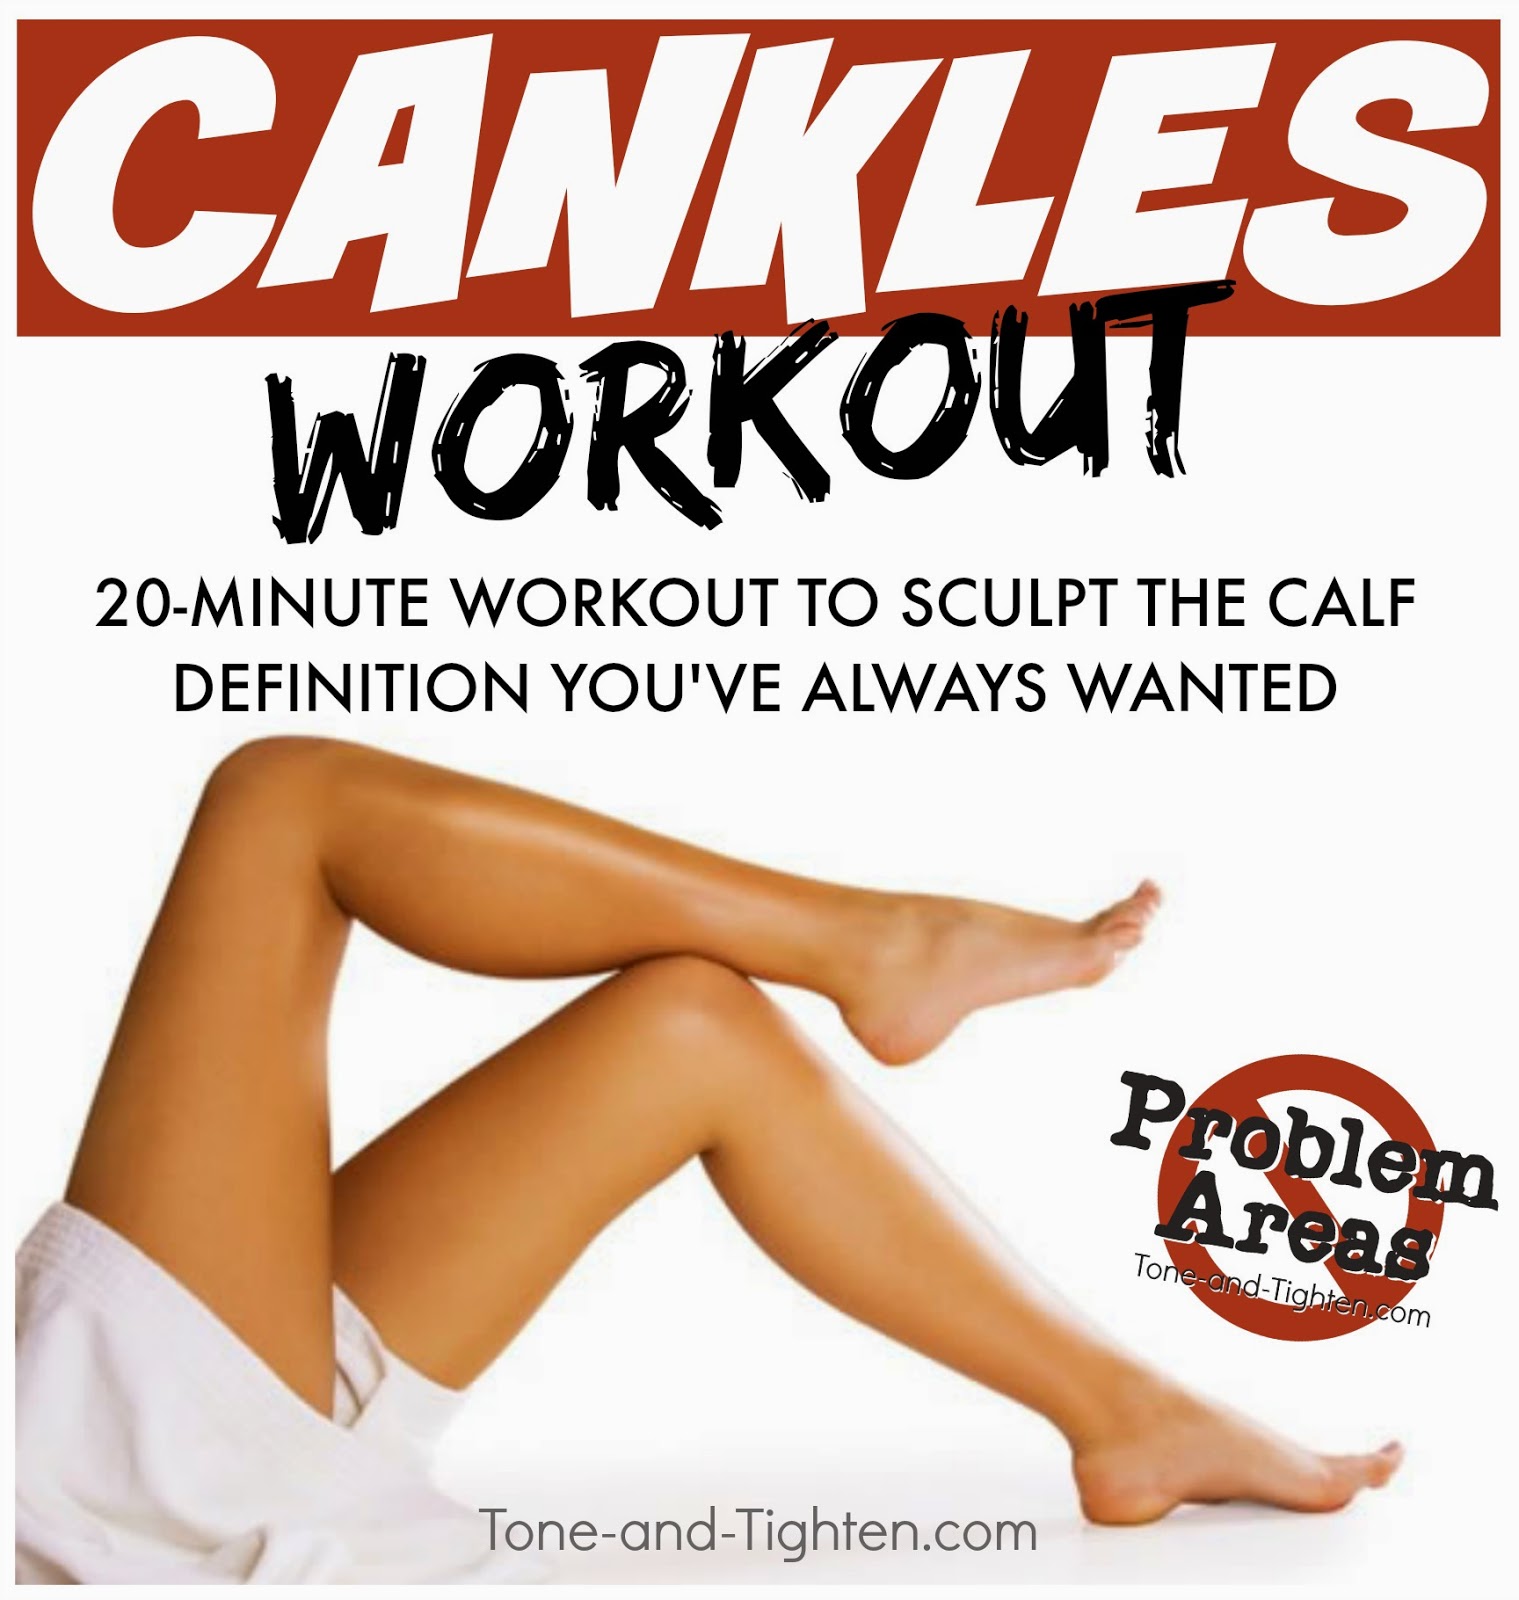 How To Get Rid Of Cankles Workout Routine | Tone and Tighten